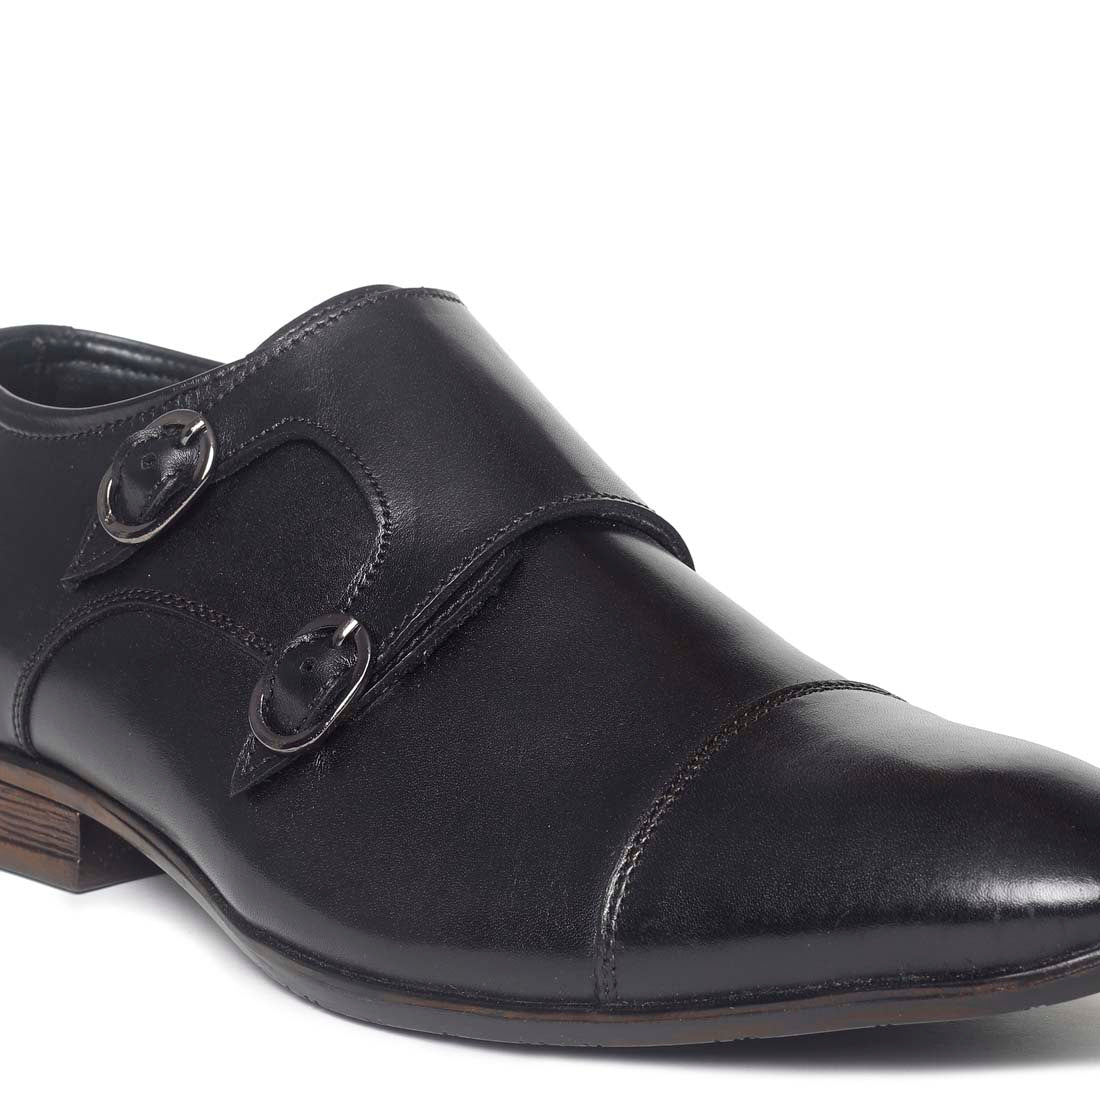 Paragon  RB11226GP Men Formal Shoes | Corporate Office Shoes | Smart &amp; Sleek Design | Comfortable Sole with Cushioning | For Daily &amp; Occasion Wear